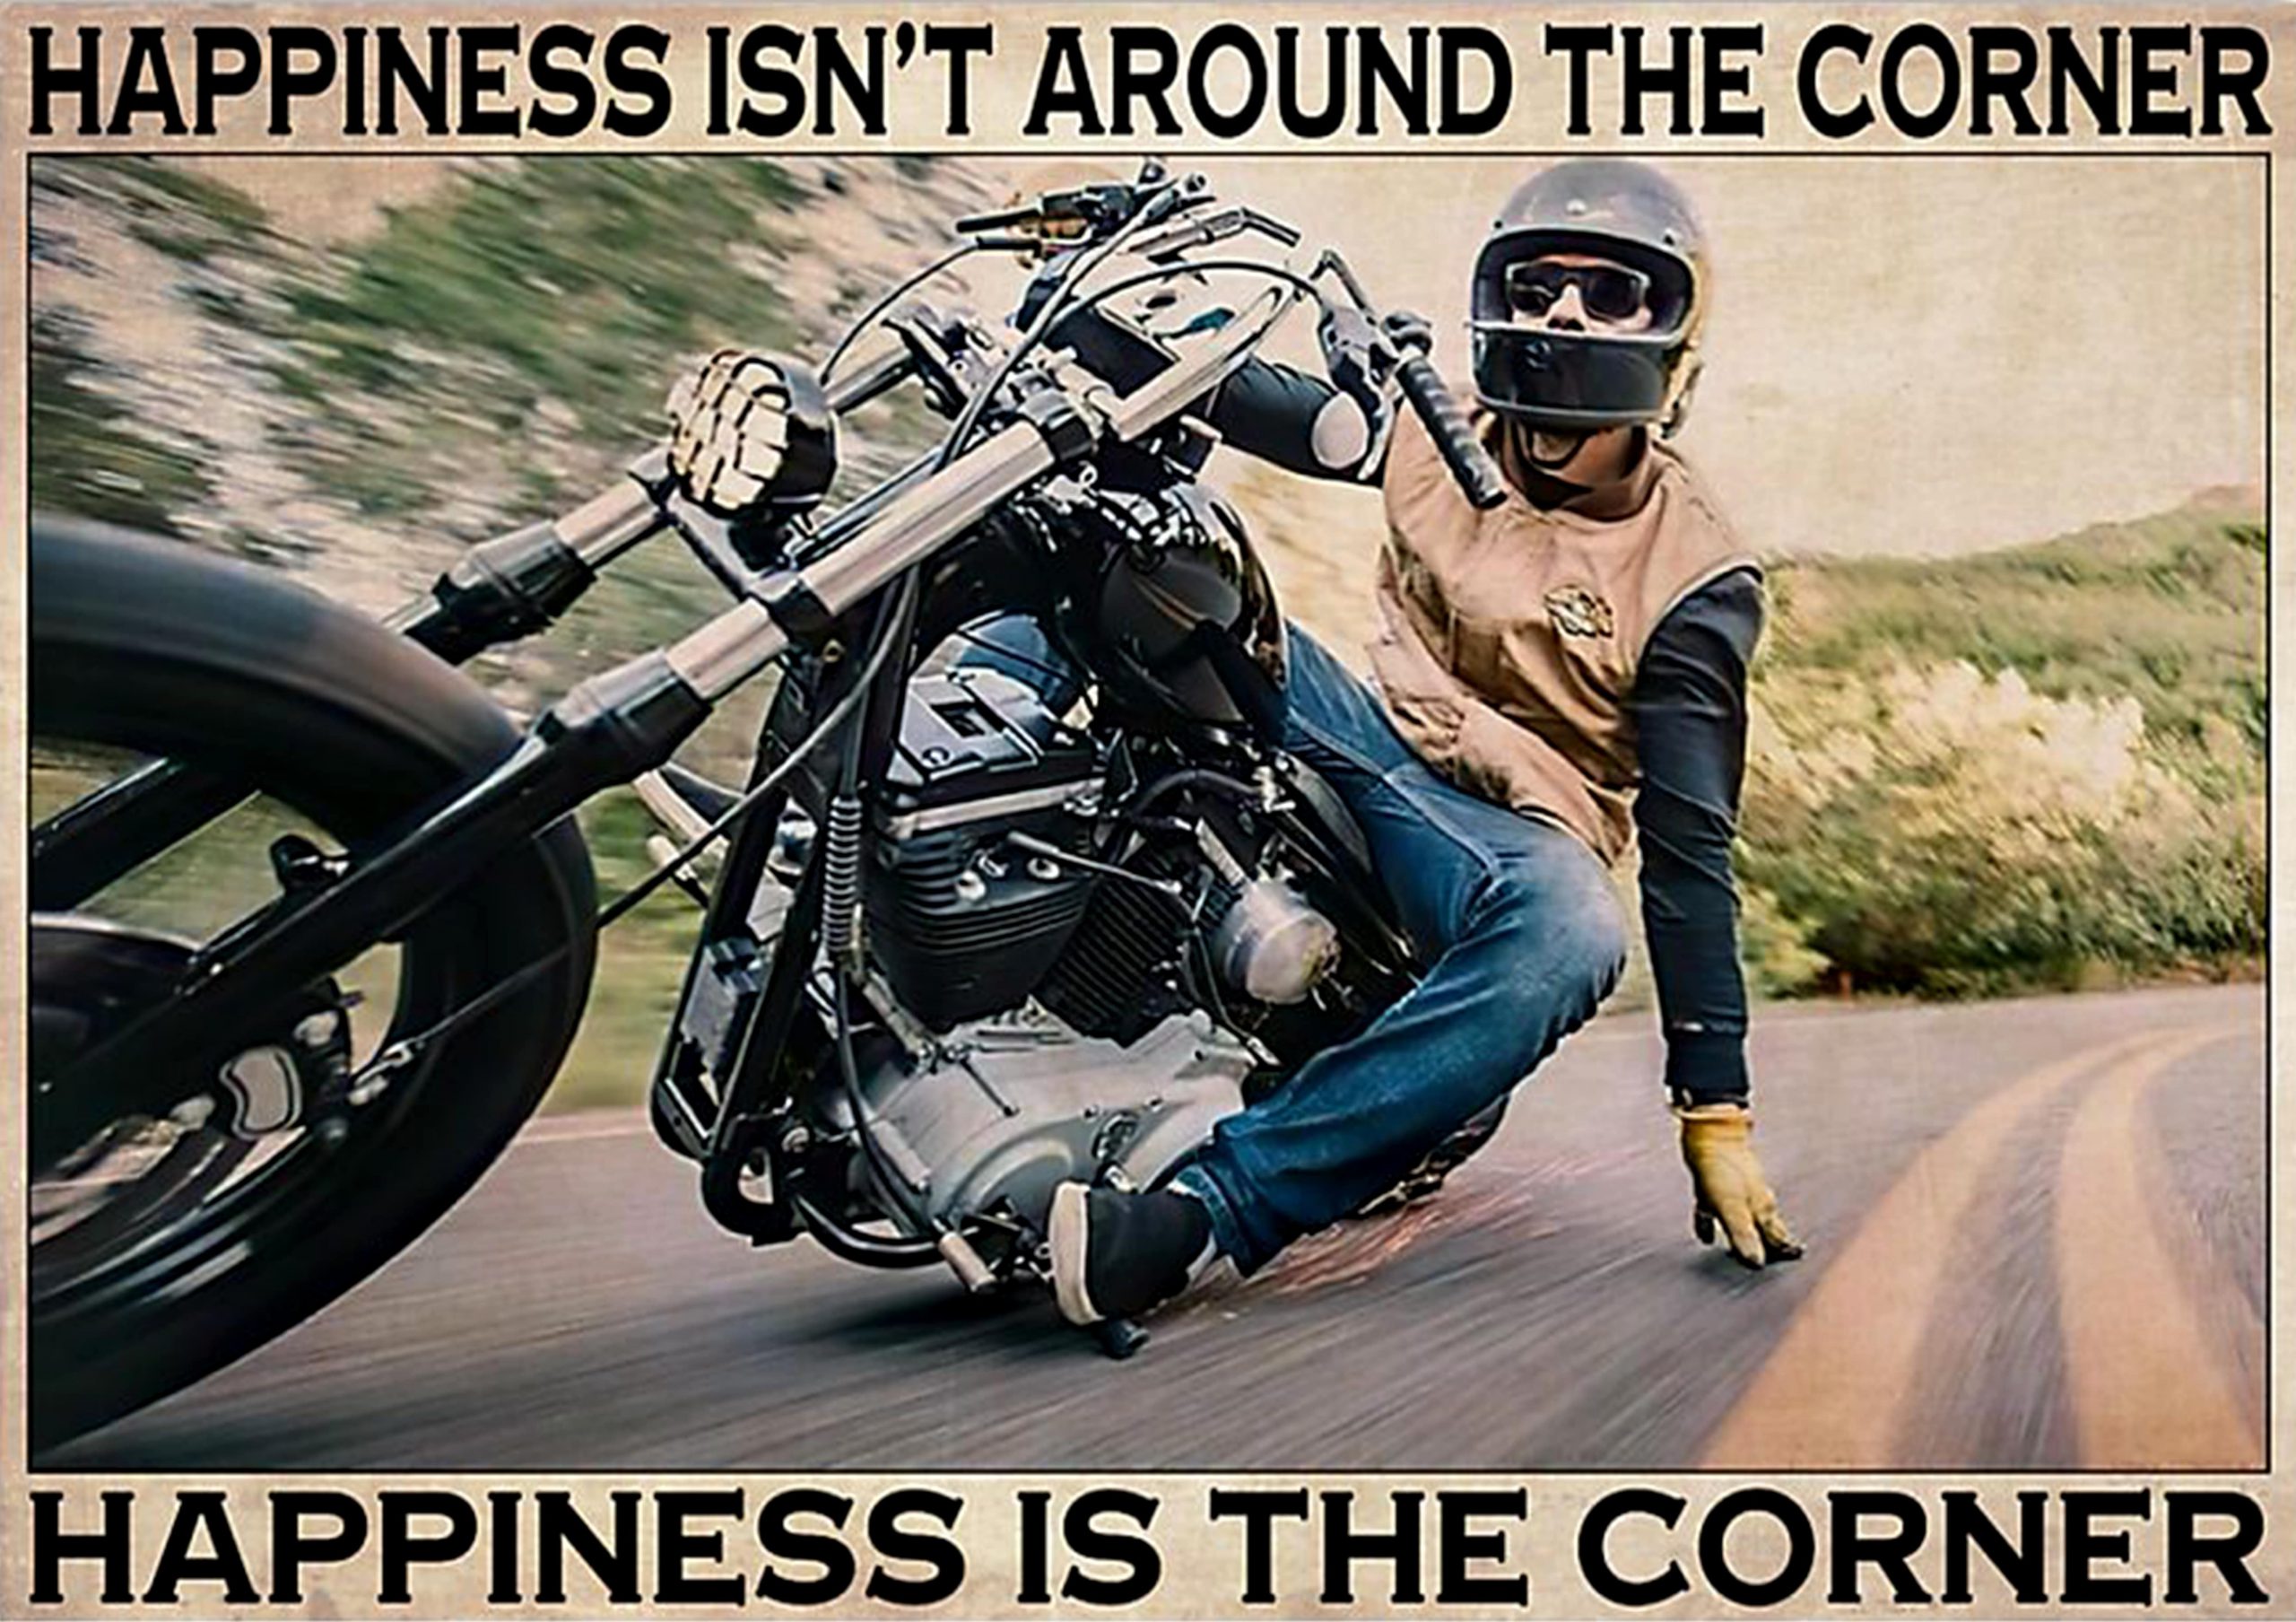 vintage motorcycle happiness isnt around the corner happiness is the corner poster 1 - Copy (3)